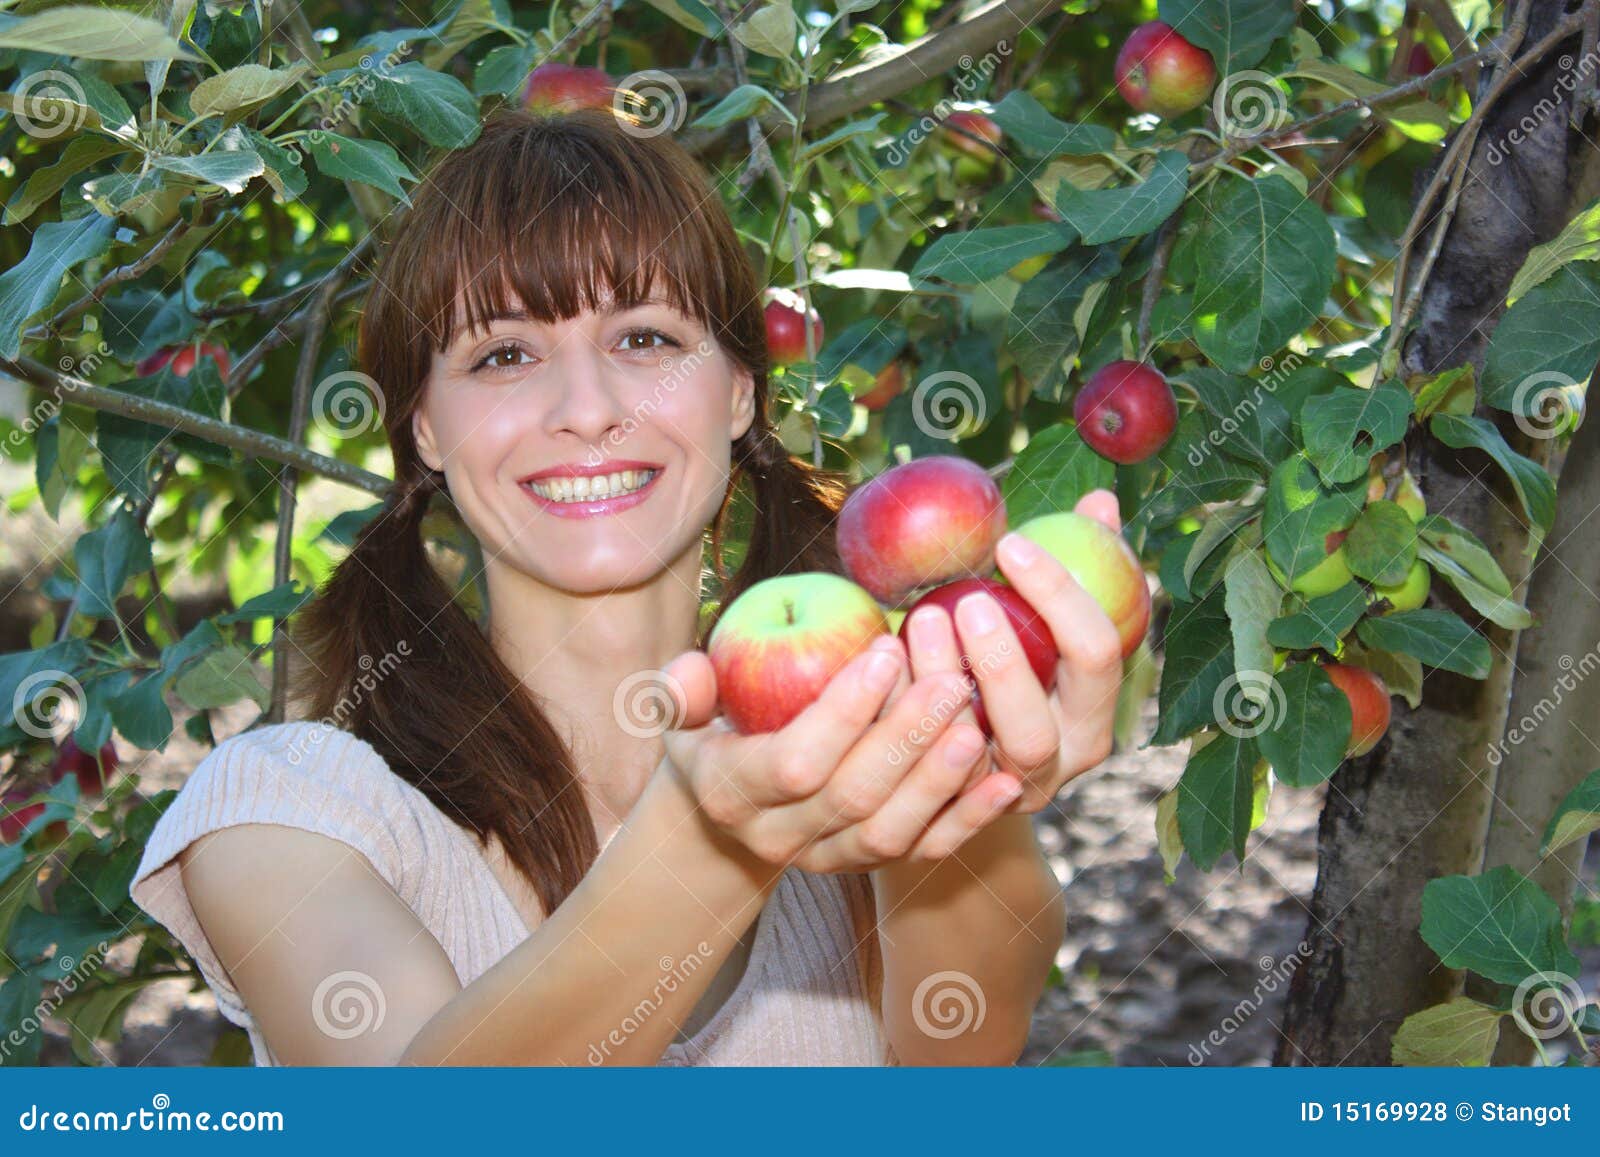 a woman offering apples